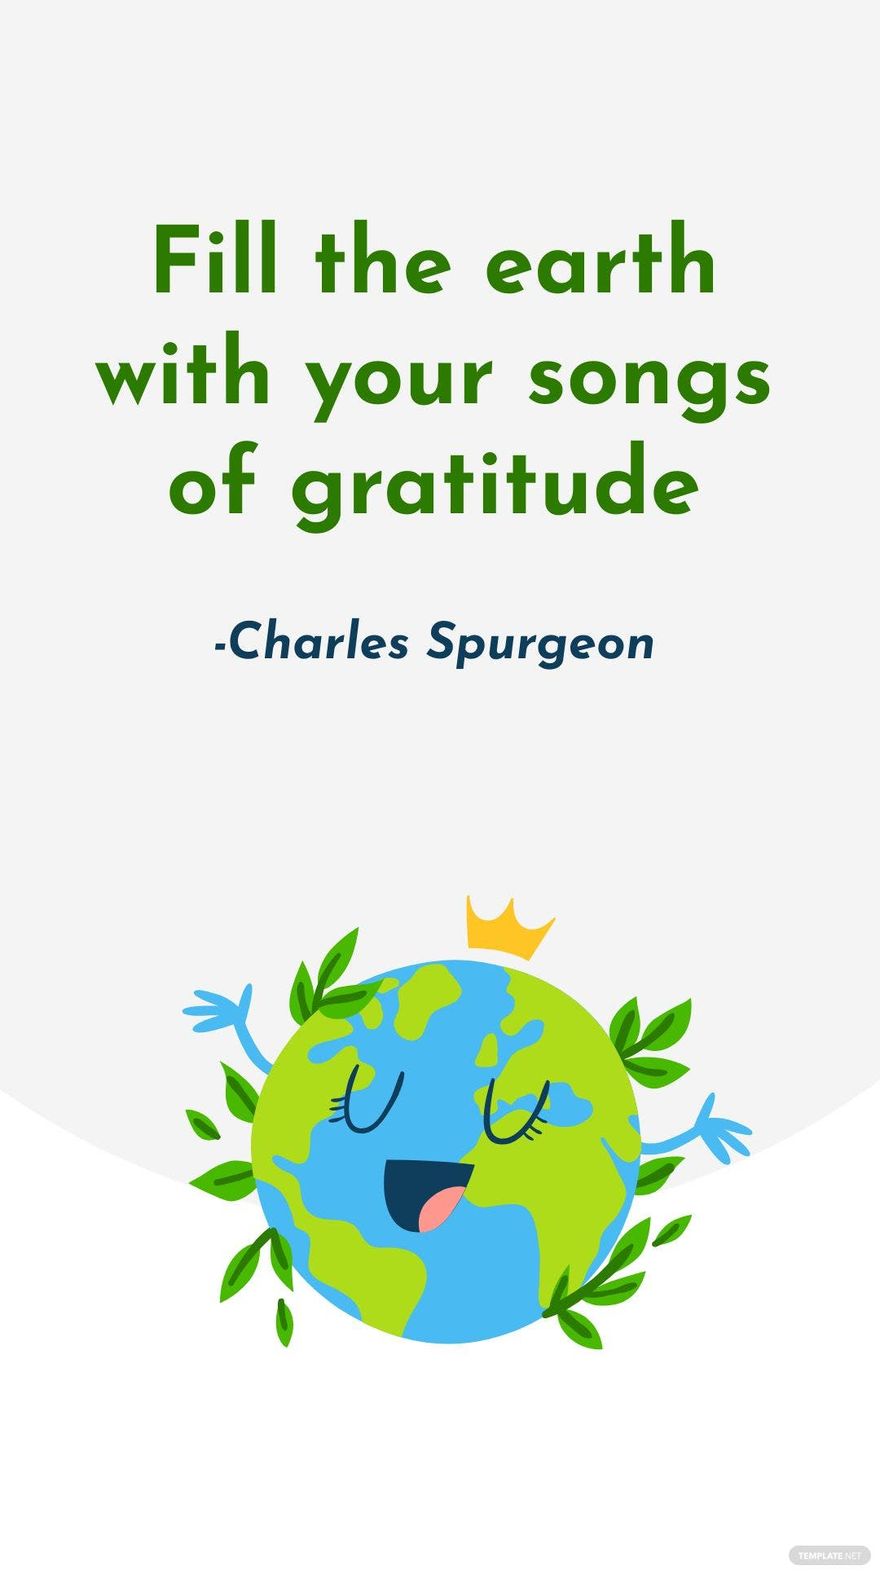 Free Charles Spurgeon - Fill the earth with your songs of gratitude in JPG